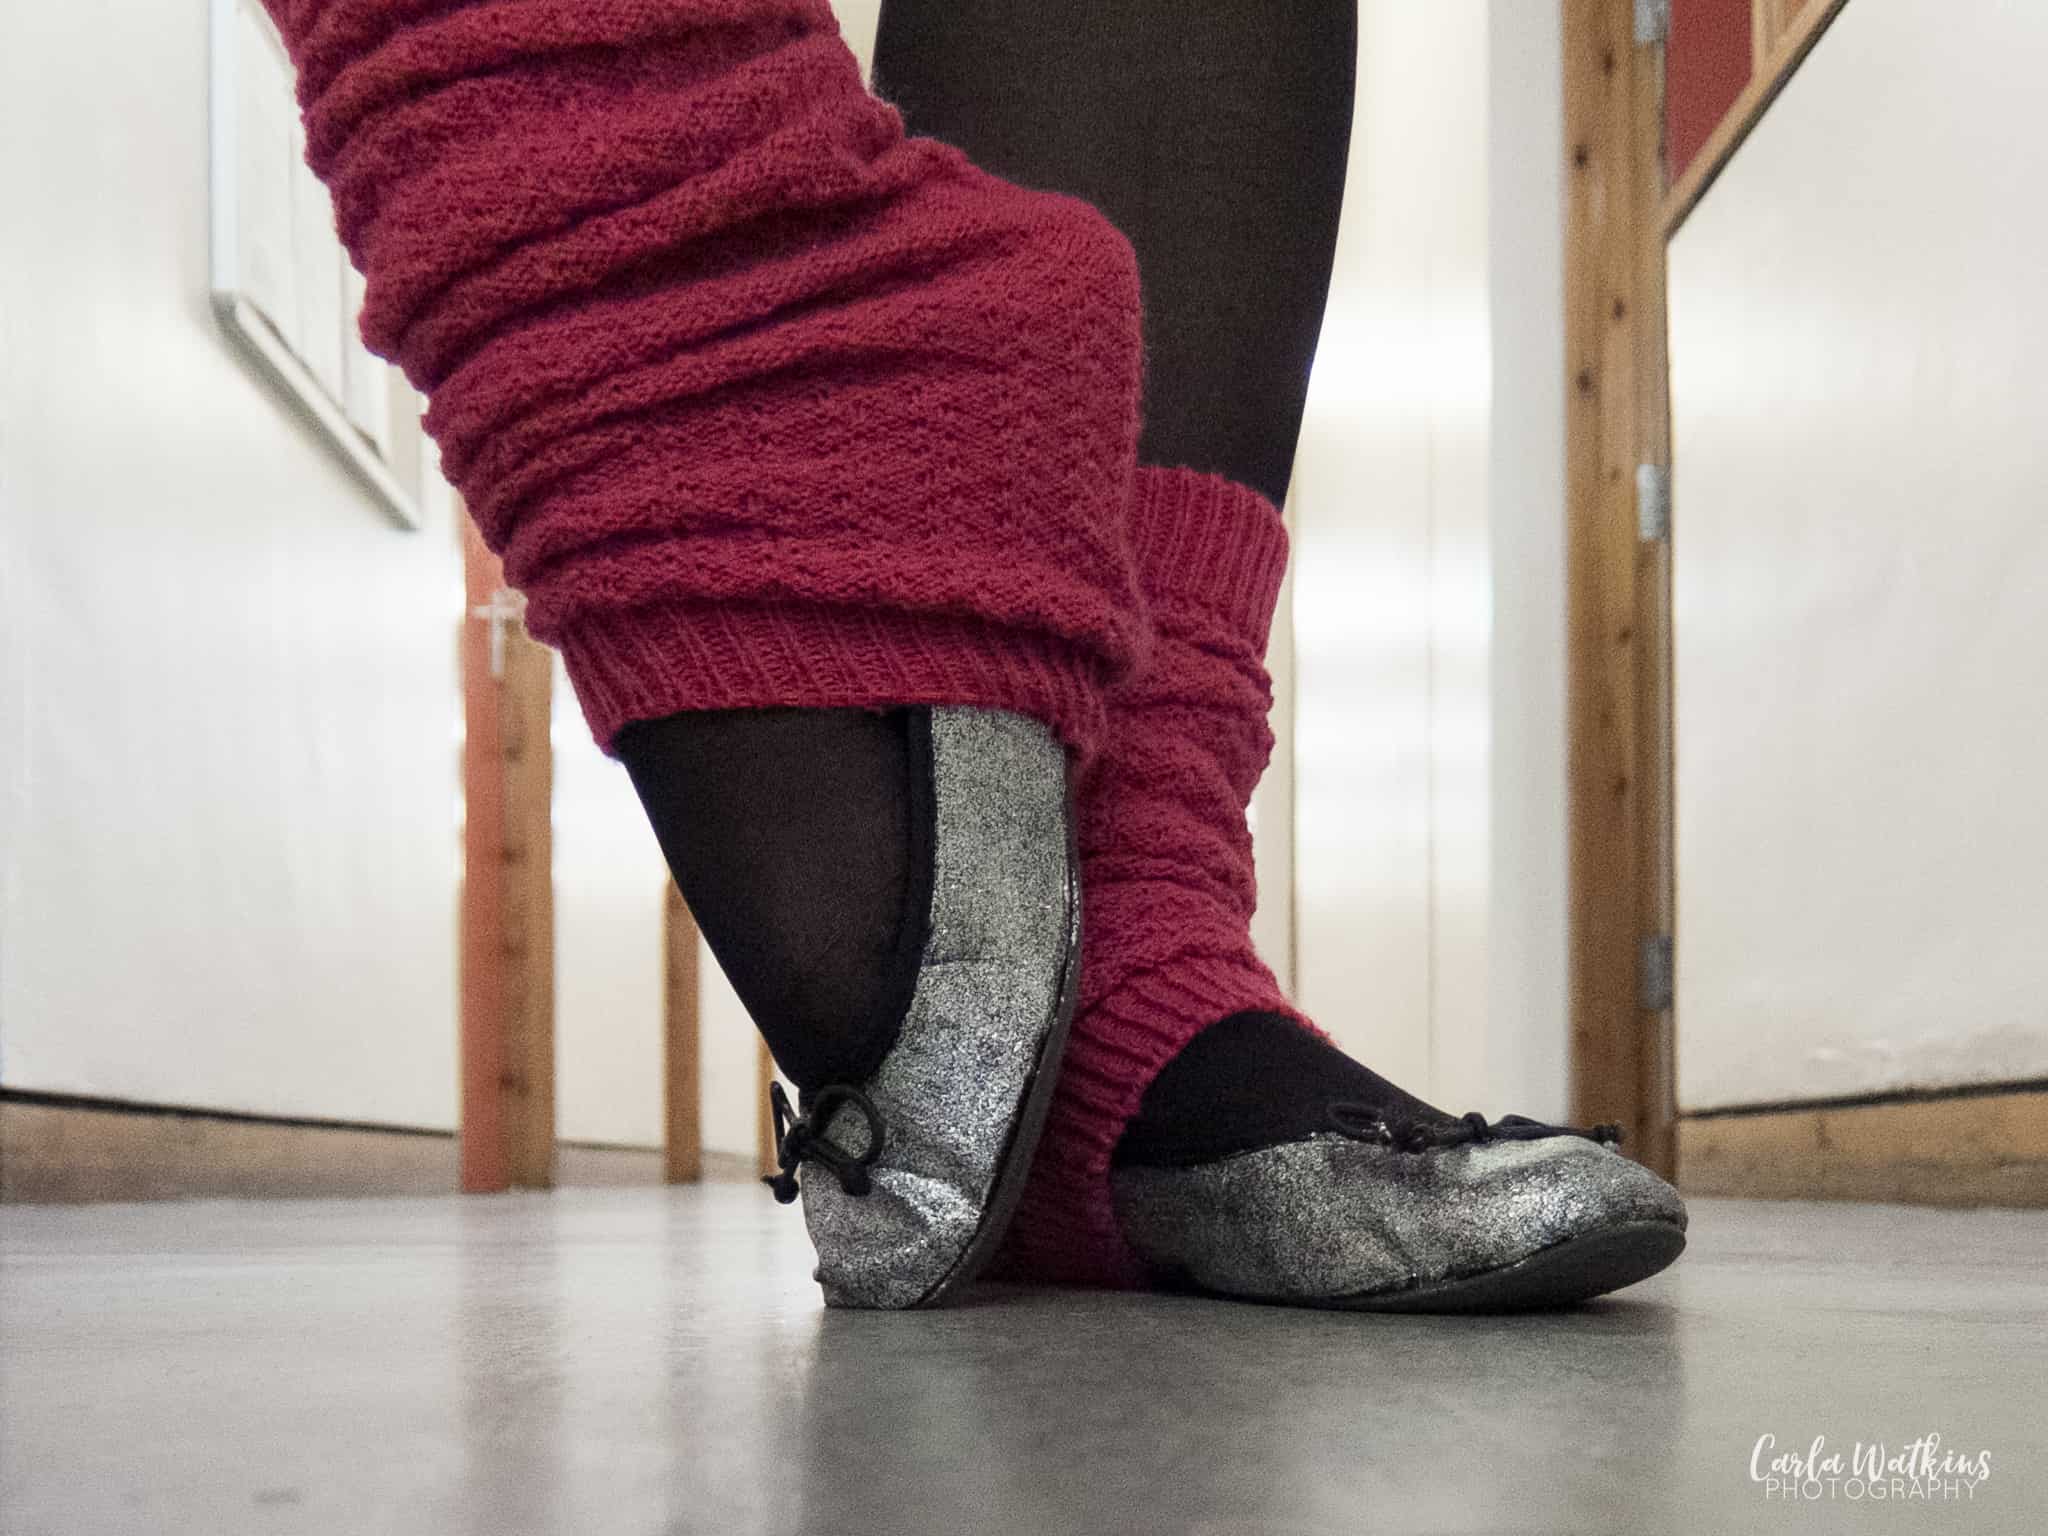 Put On Your Dancing Shoes - glitter ballet shoes and pink legwarmers in a university corridor | Carla Watkins Photography 2016 | carlawatkinsphotography.com